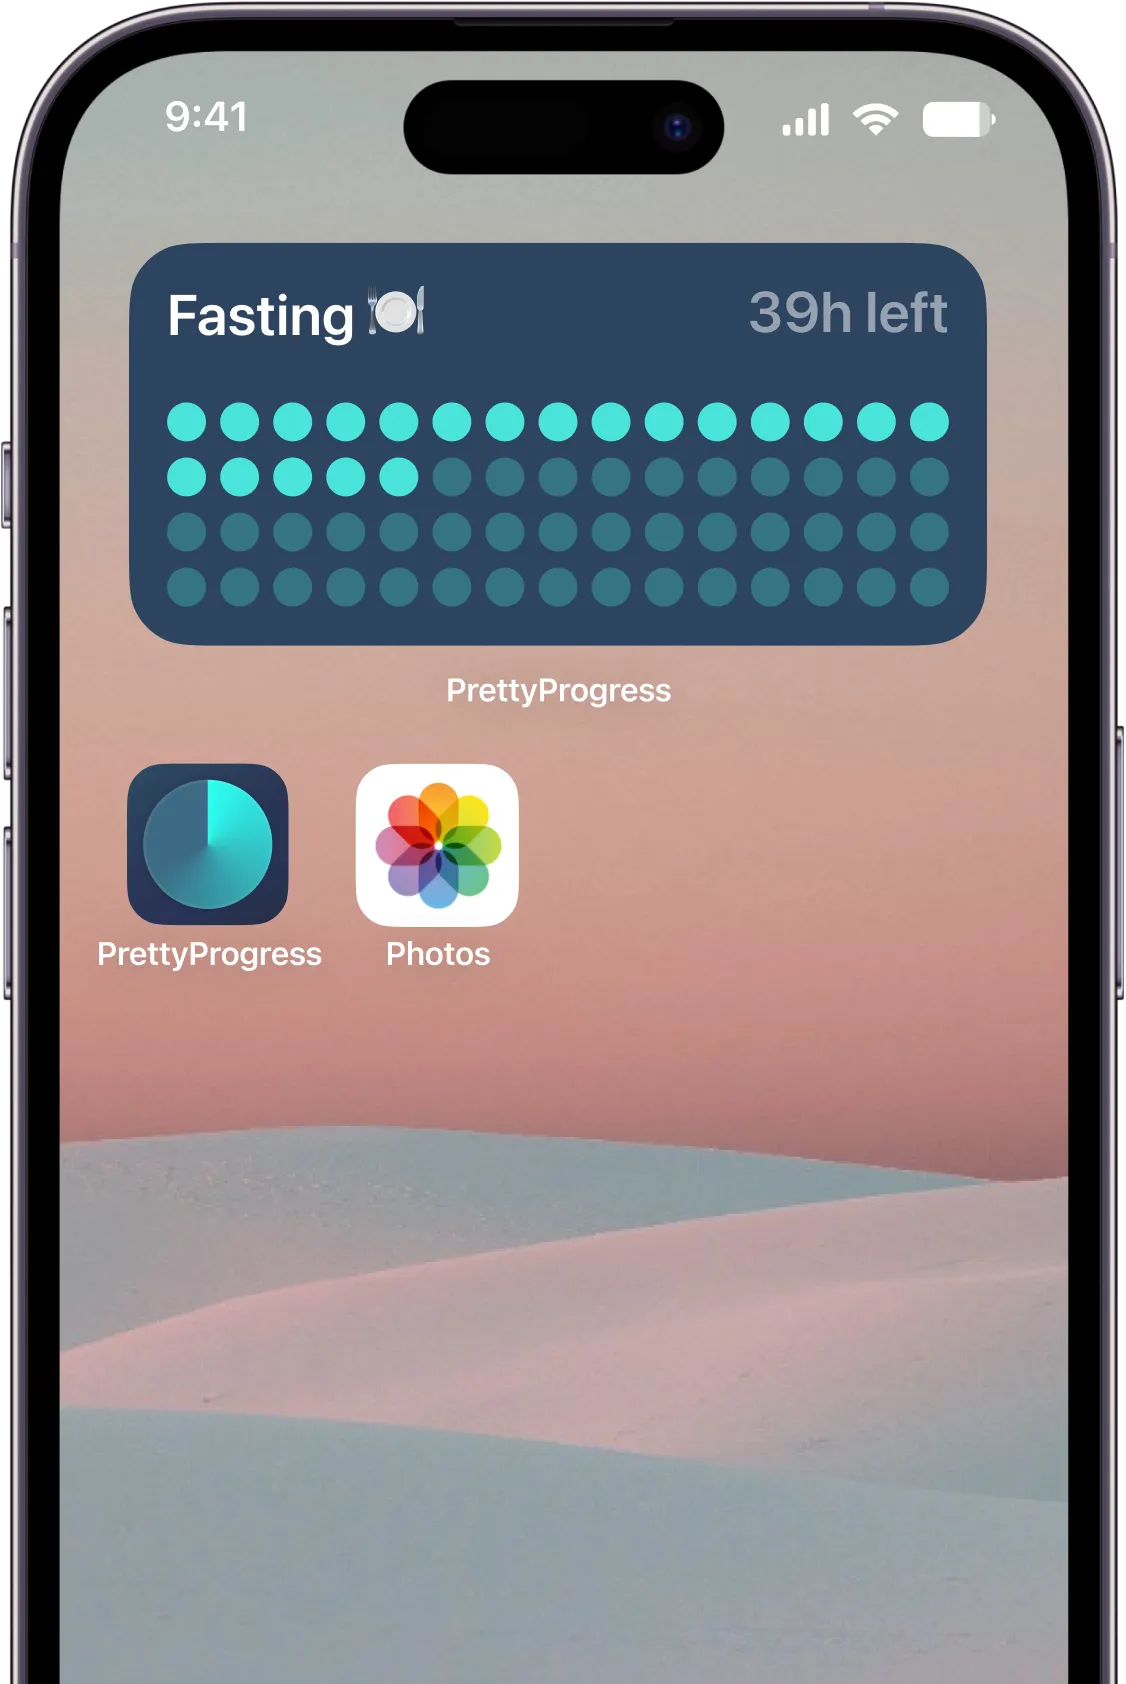 iPhone showing a fasting countdown widget on its HOme Screen